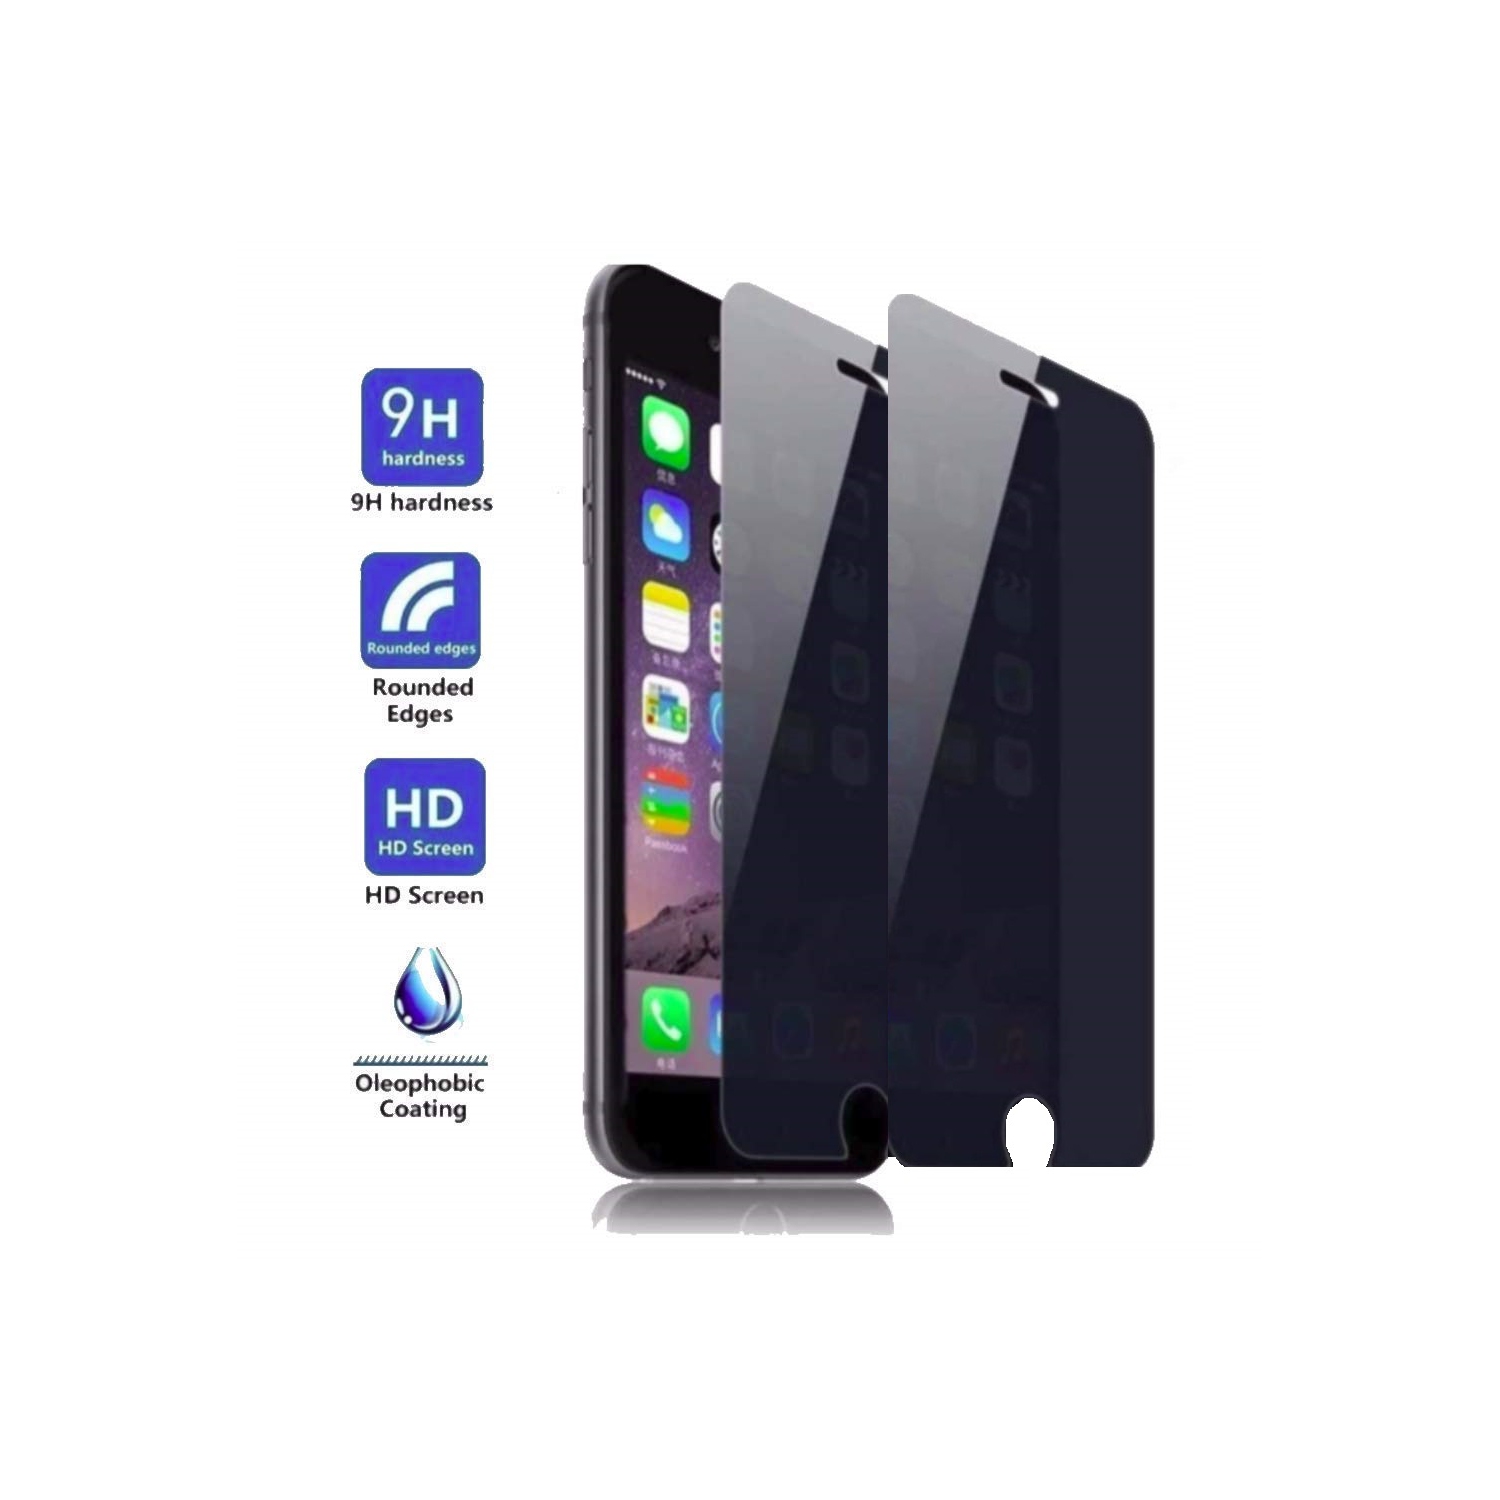 HYFAI Privacy Anti-Spy Tempered Glass Screen Protector For Apple iPhone 6/7/8 (2 Pack)